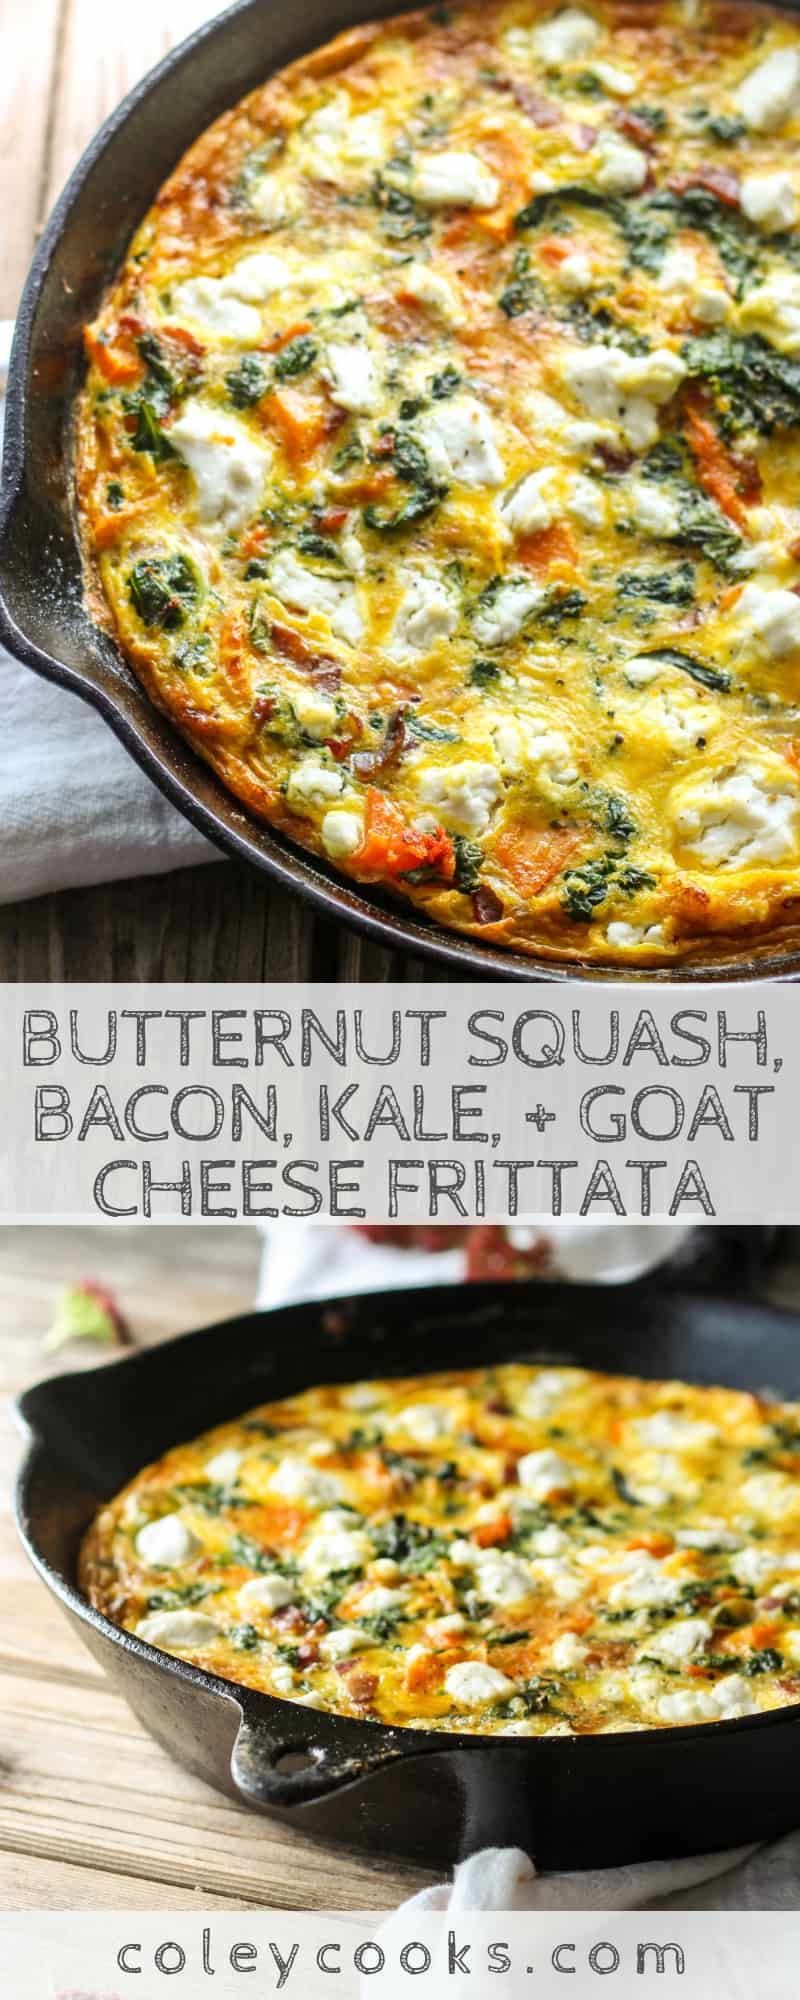 Butternut Squash, Bacon, Kale, + Goat Cheese Frittata | Easy frittata recipe with all the best Fall vegetables. Great for breakfast or brunch! #easy #fall #recipe #brunch #breakfast #eggs #frittata #kale #butternut | ColeyCooks.com